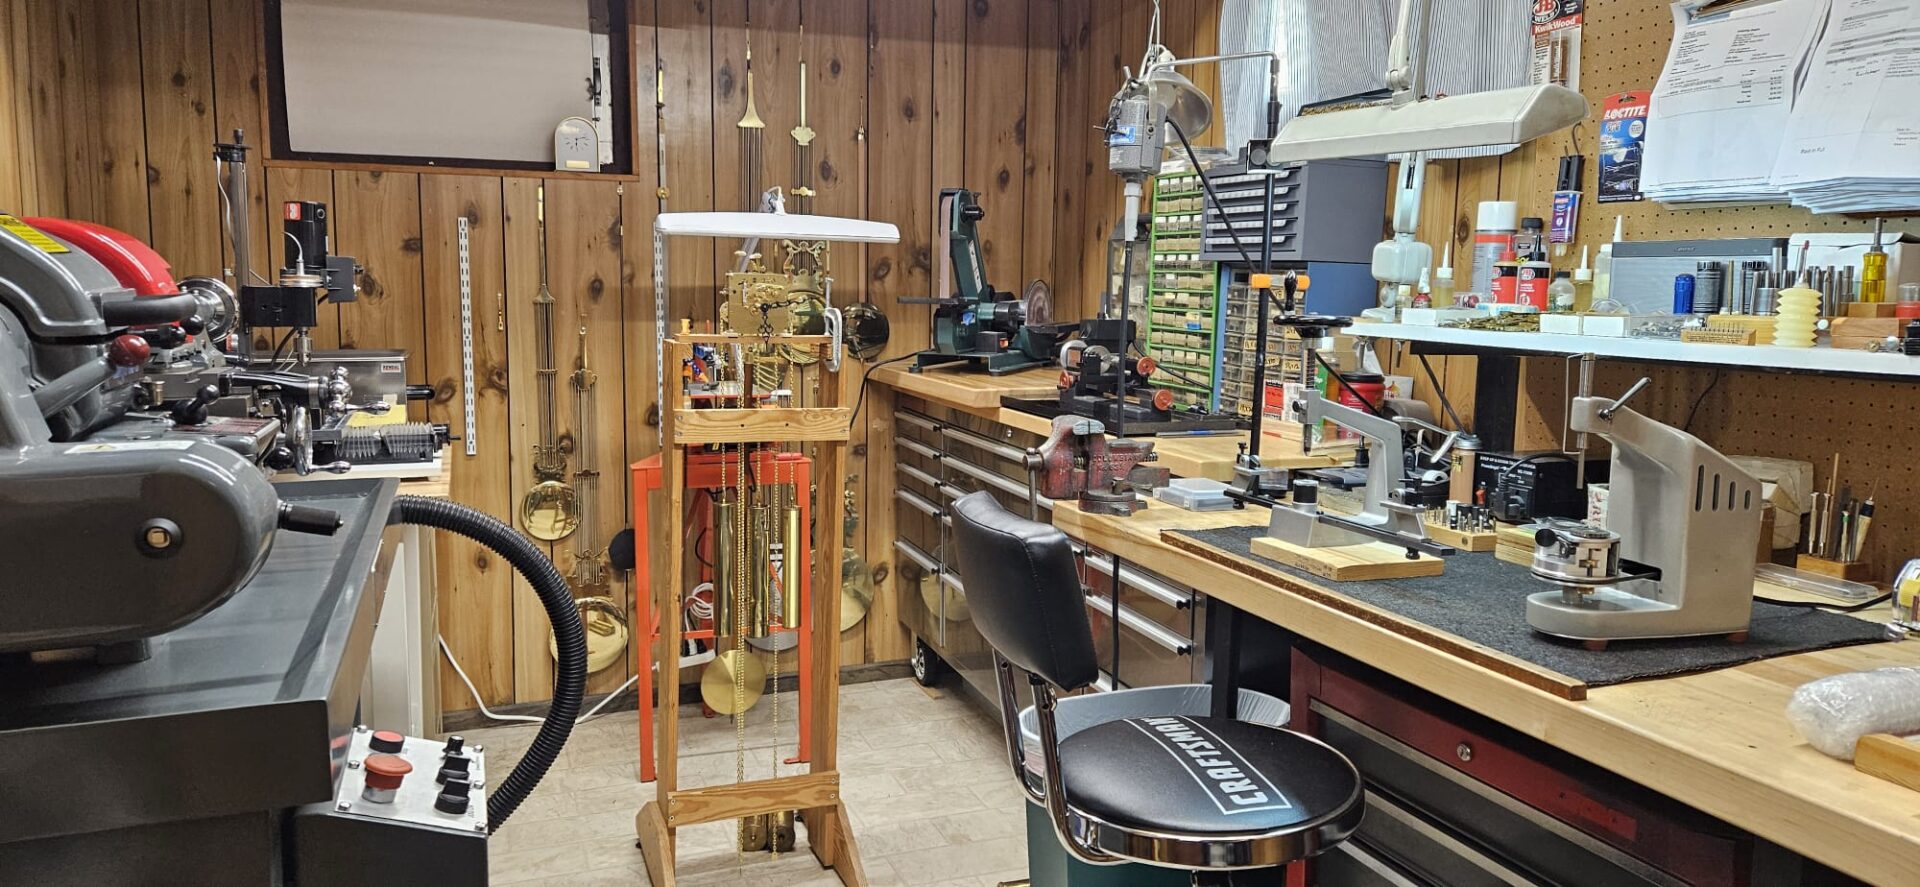 A room filled with lots of tools and equipment.